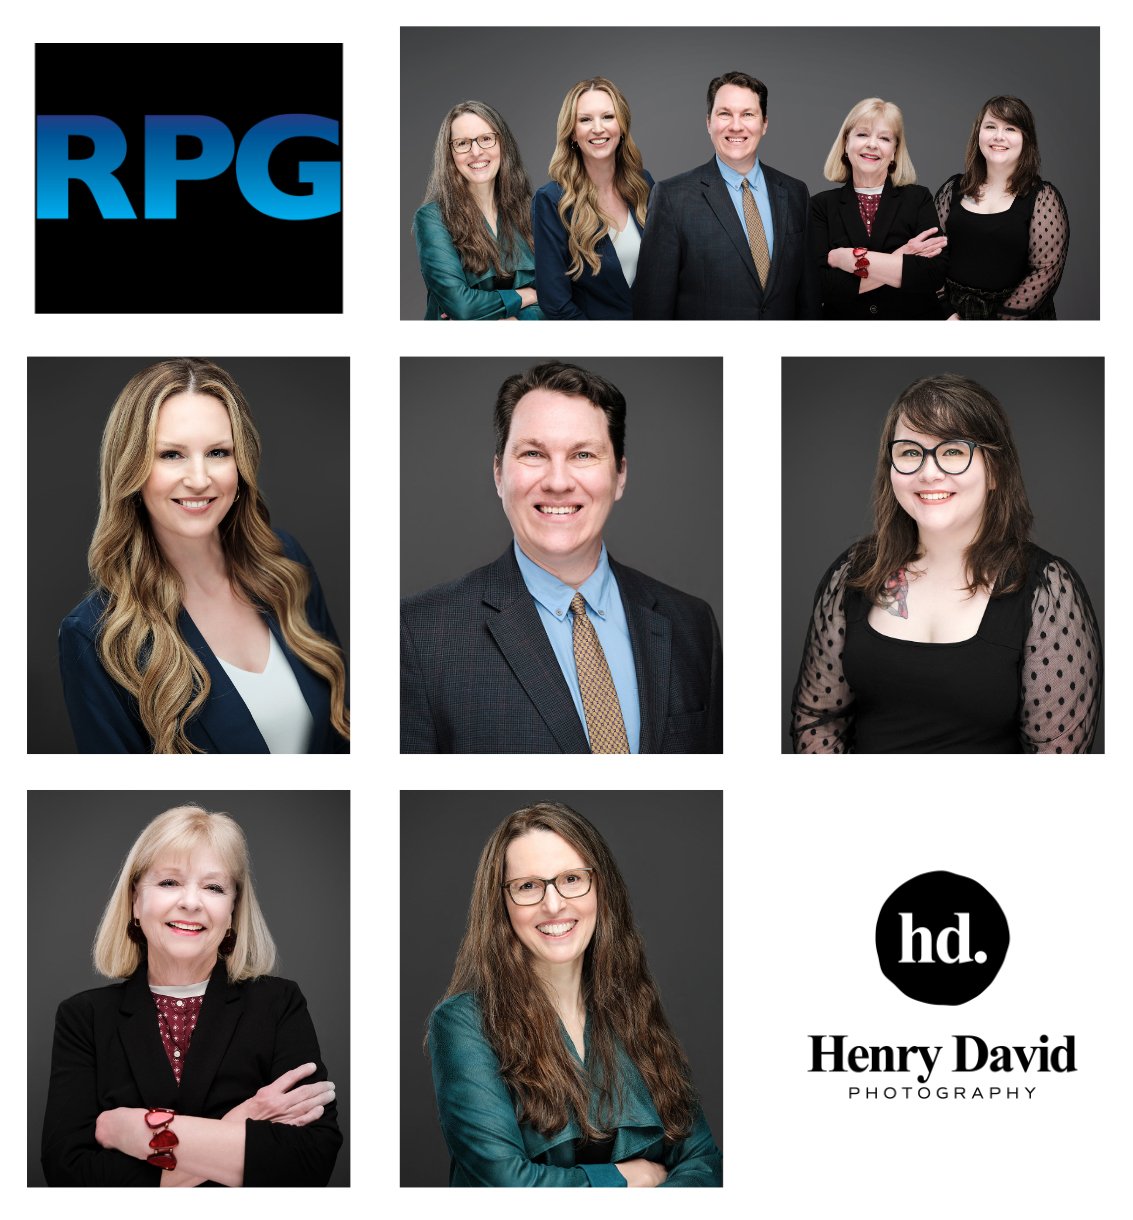 Team Headshots for Research and Planning Group Brentwood MO.jpg